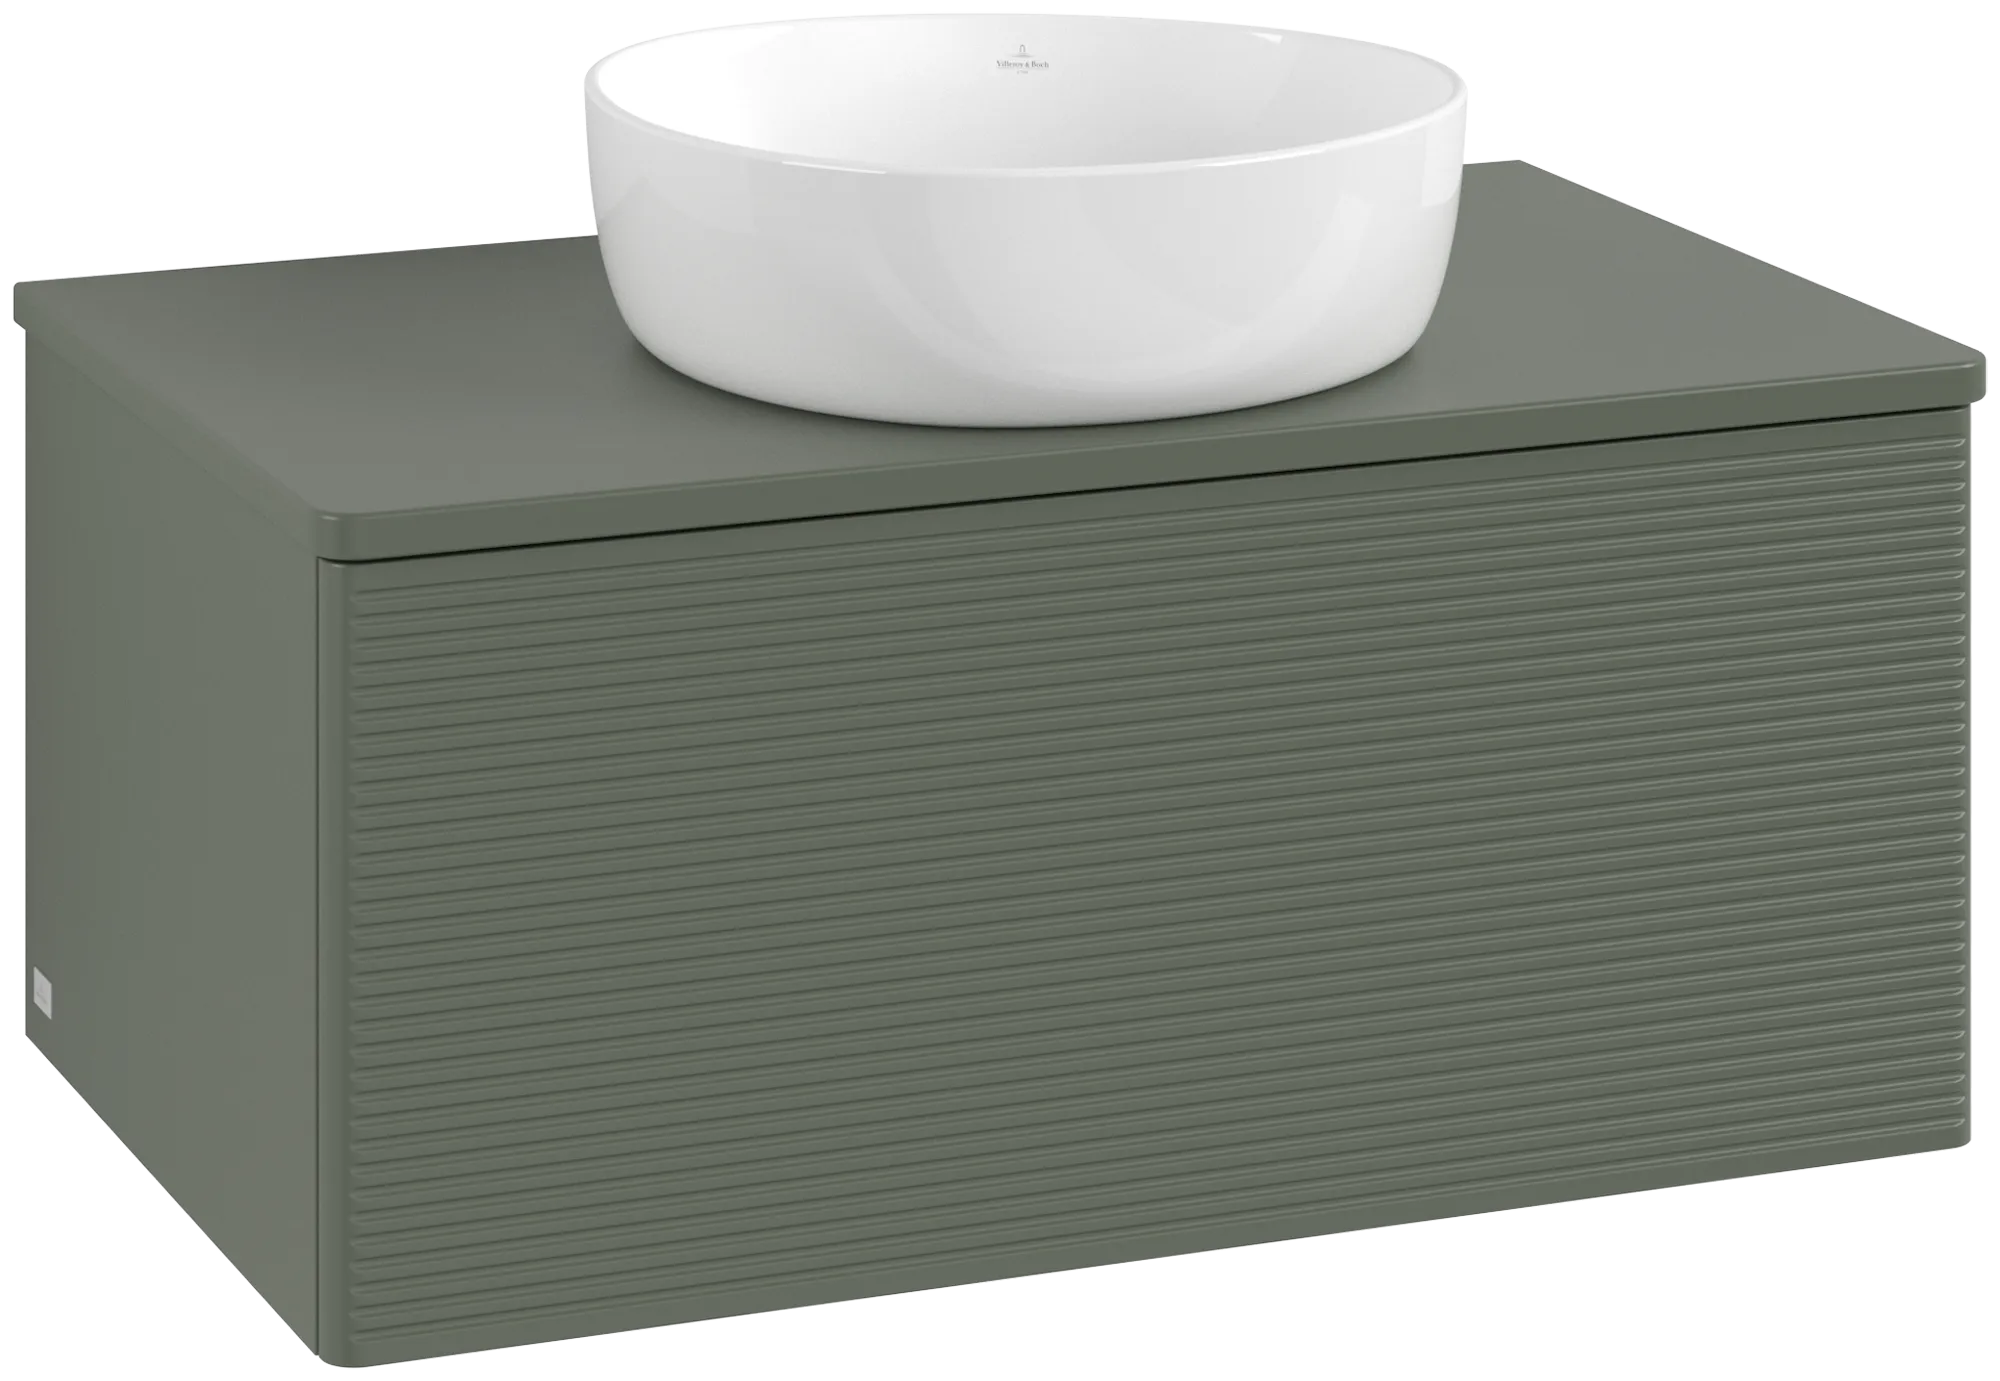 Obrázek VILLEROY BOCH Antao Vanity unit, with lighting, 1 pull-out compartment, 800 x 360 x 500 mm, Front with grain texture, Leaf Green Matt Lacquer / Leaf Green Matt Lacquer #L30150HL